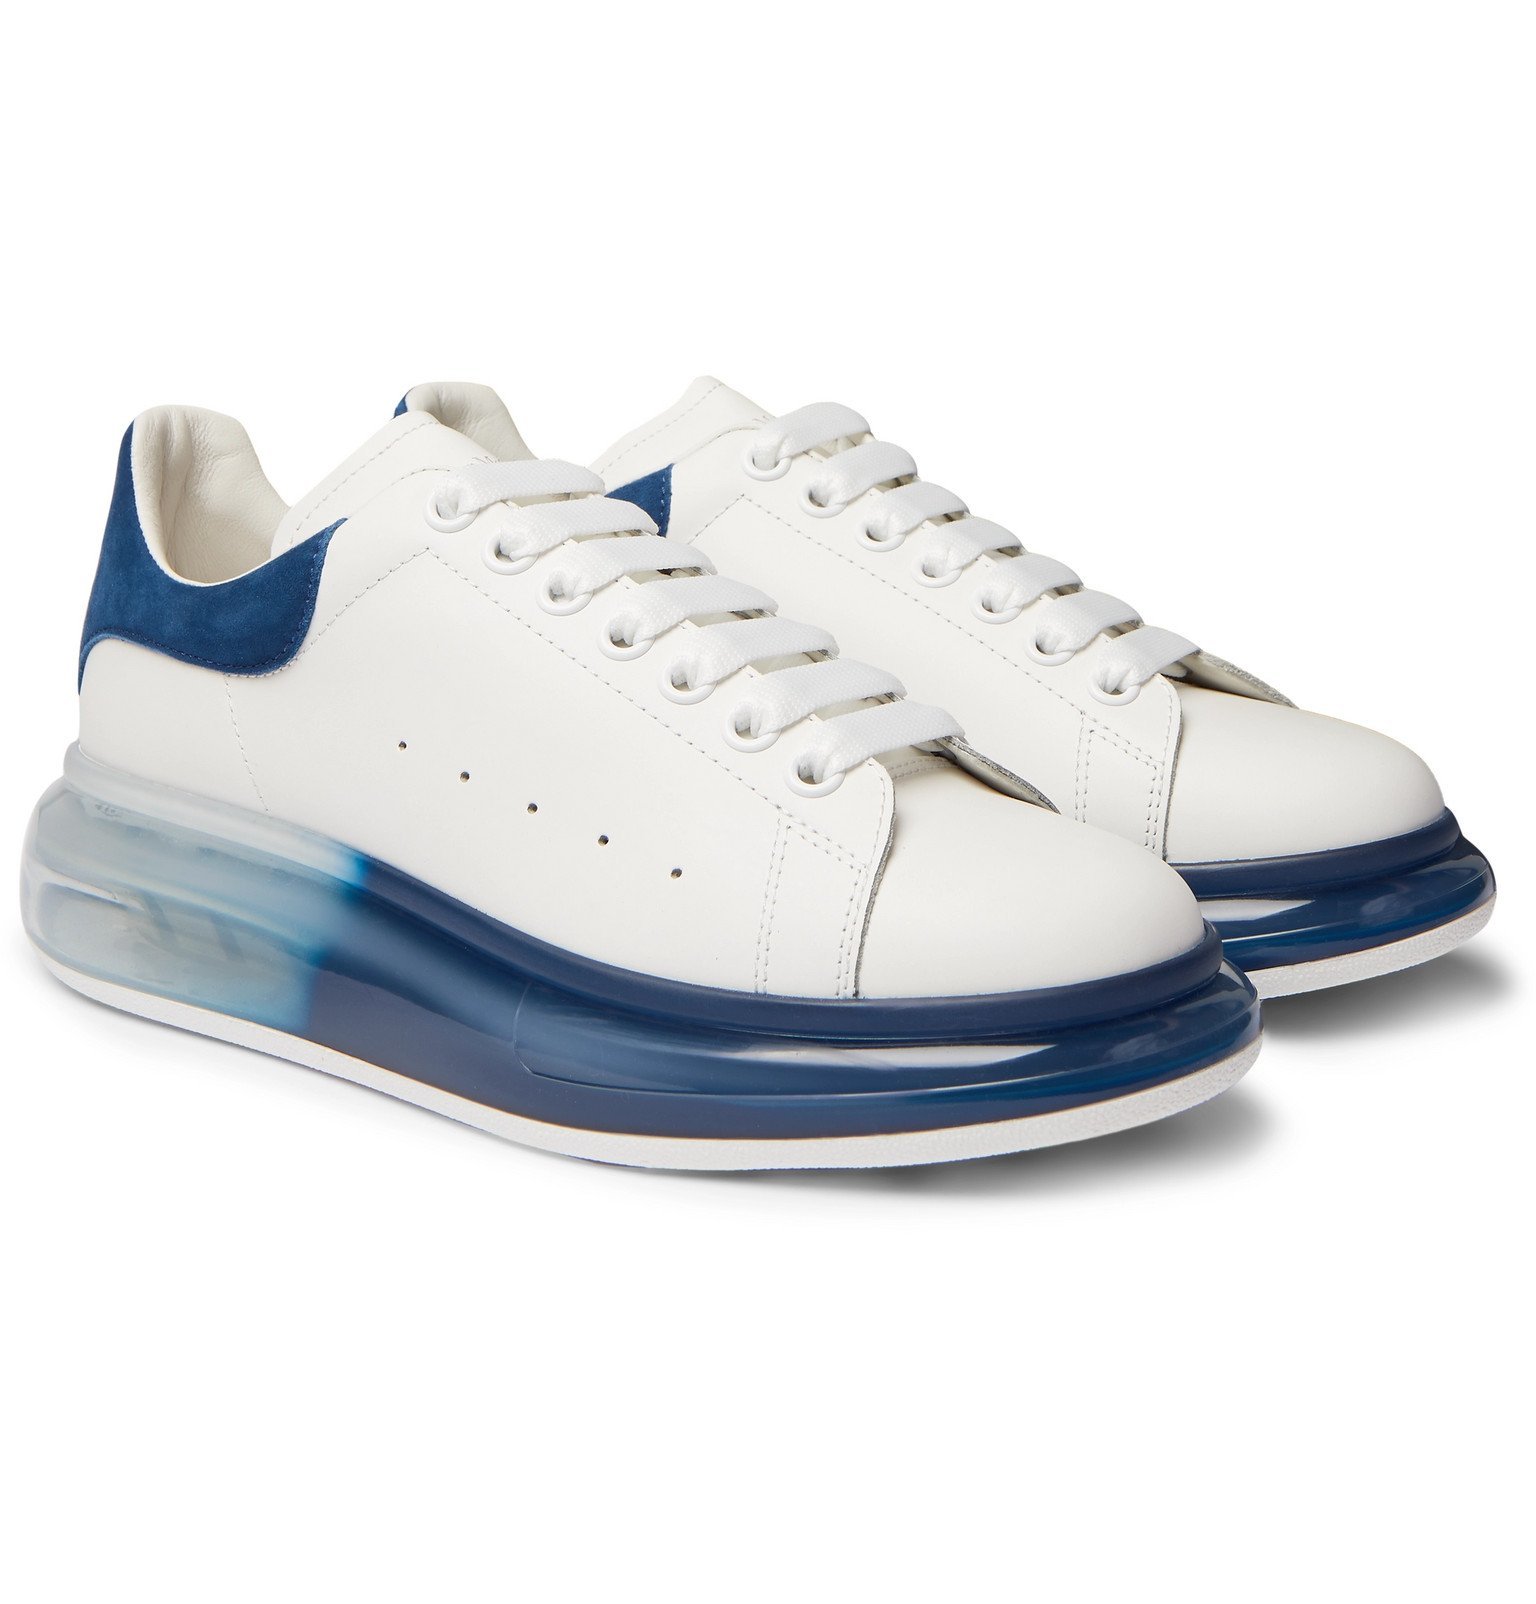 Alexander McQueen ExaggeratedSole SuedeTrimmed Leather Sneakers